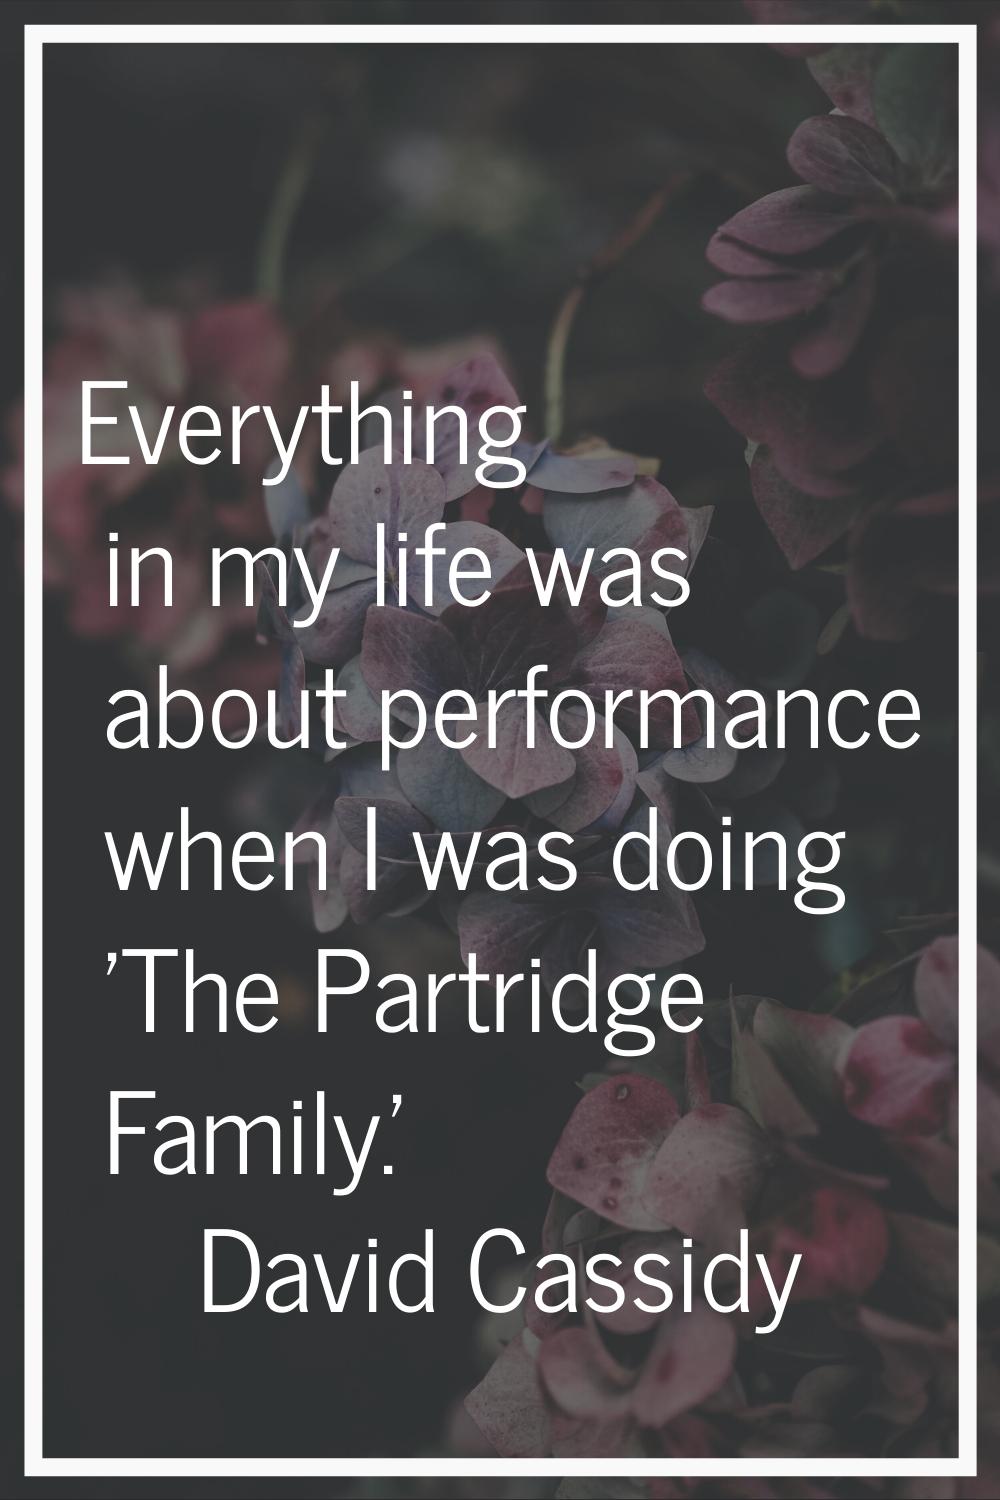 Everything in my life was about performance when I was doing 'The Partridge Family.'